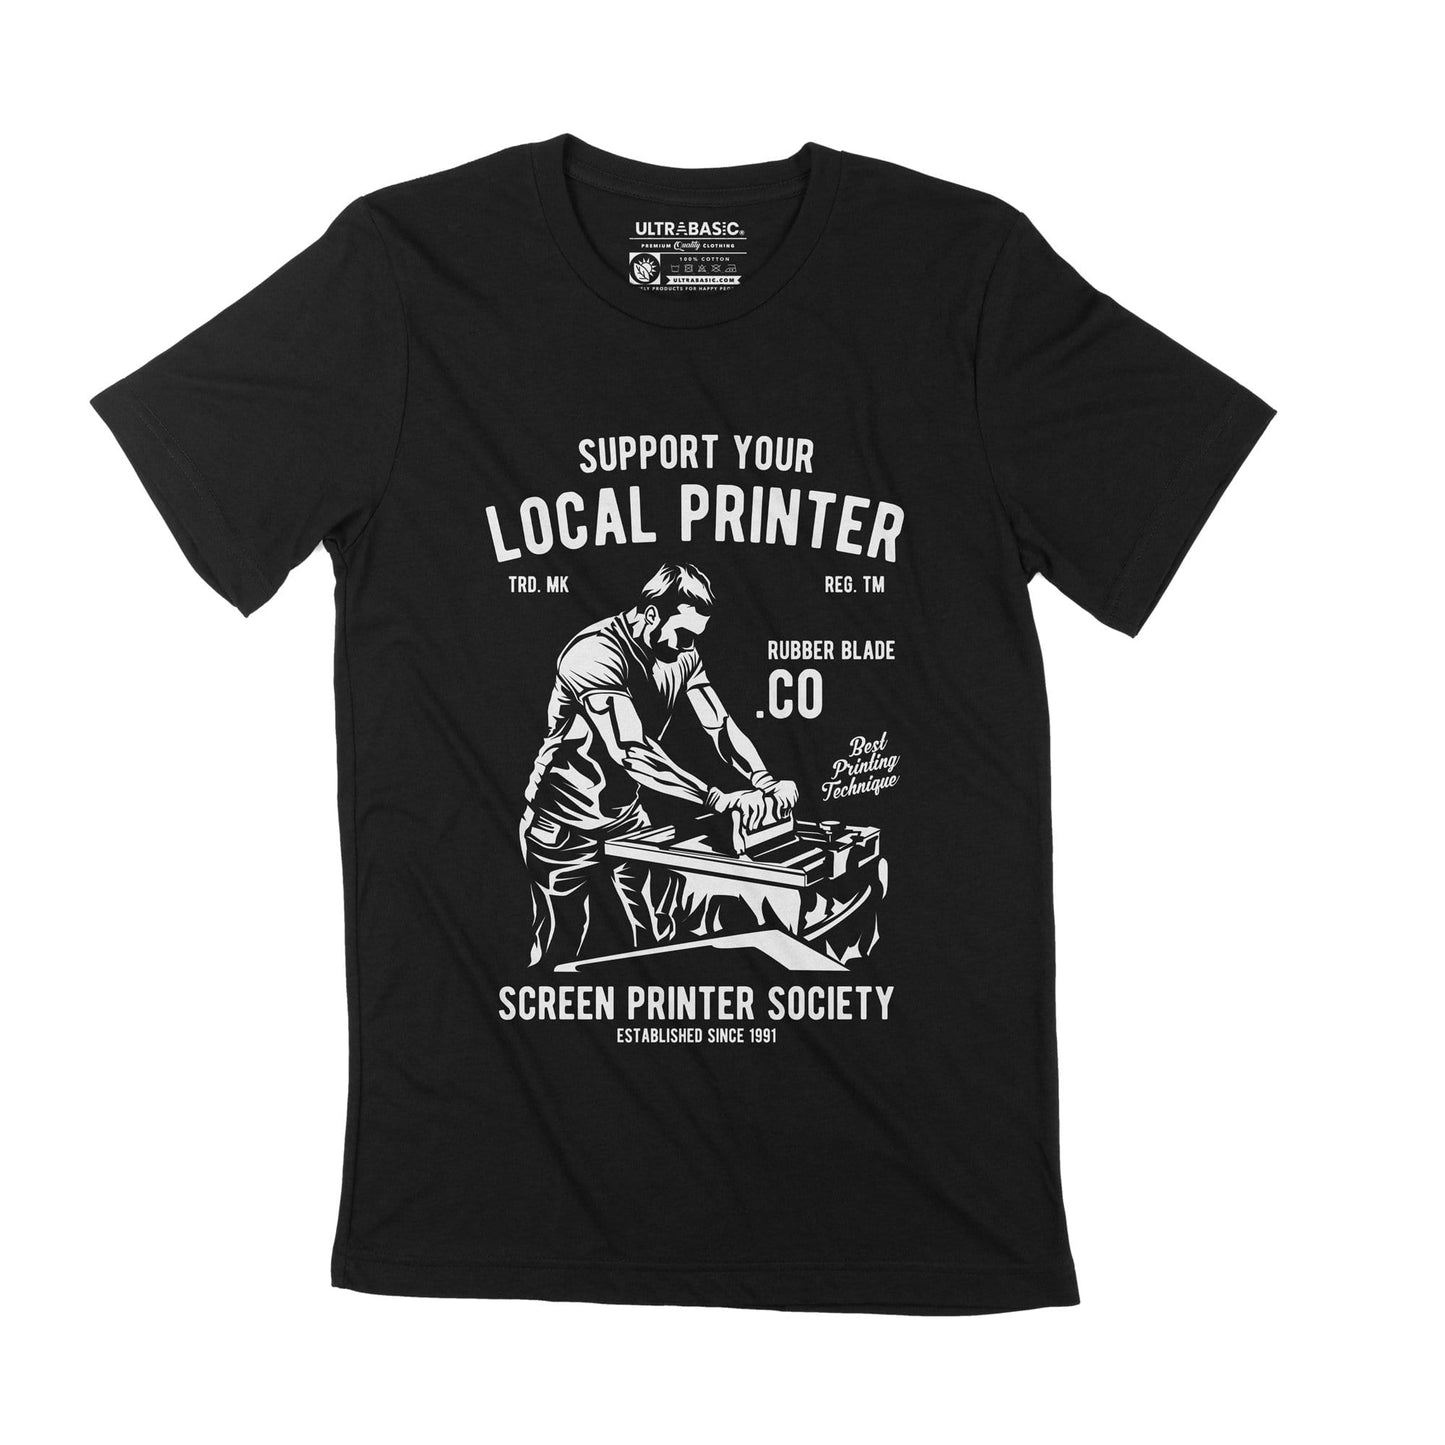 ULTRABASIC Support Your Local Printer Men's T-Shirt - Screen Printer Society silkscreen logo birthday gifts ideas short sleeve  tshirts tees youth apparel unisex merchandise clothing men outdoor printing guy funny job artist adult squeegee fighter printing community vintage womens printed modern clothes boys stylish